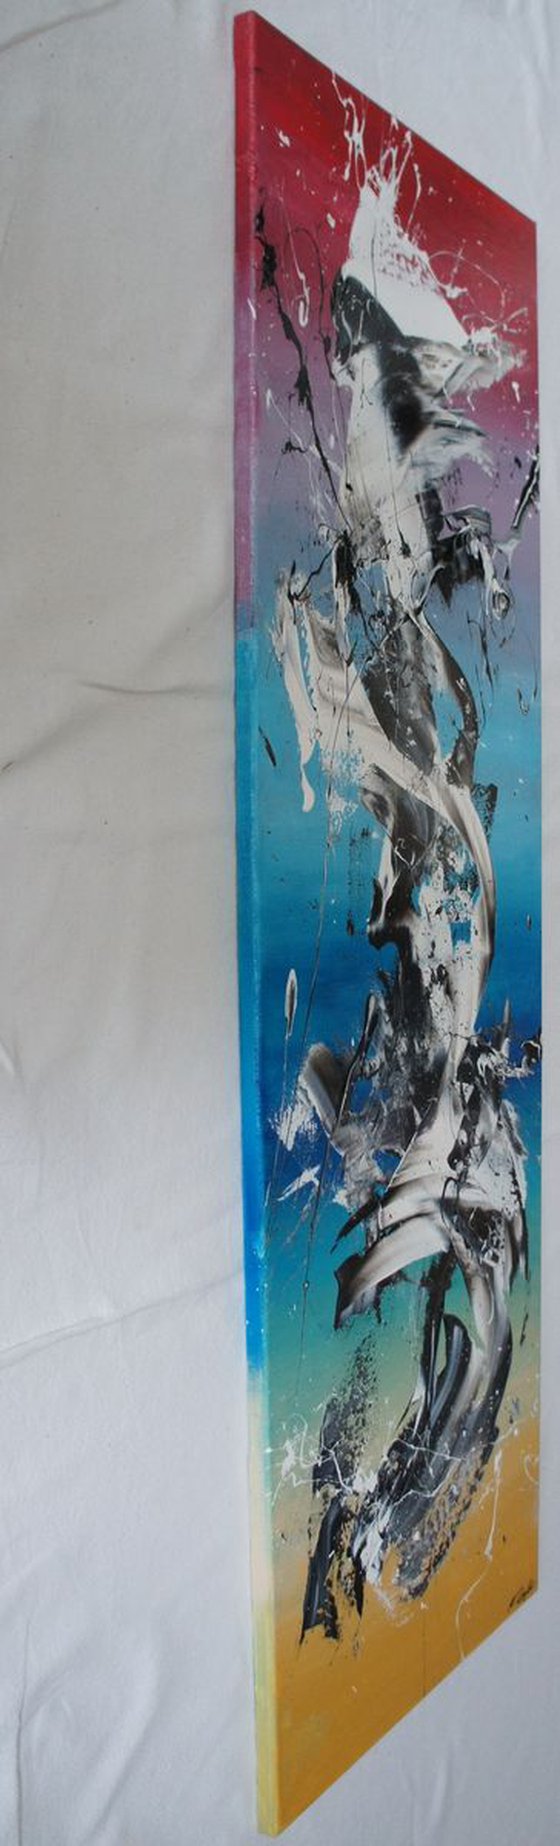 Vertical Inversion I (Spirits Of Skies 048056) (40 x 120 cm) XL (16 x 48 inches)